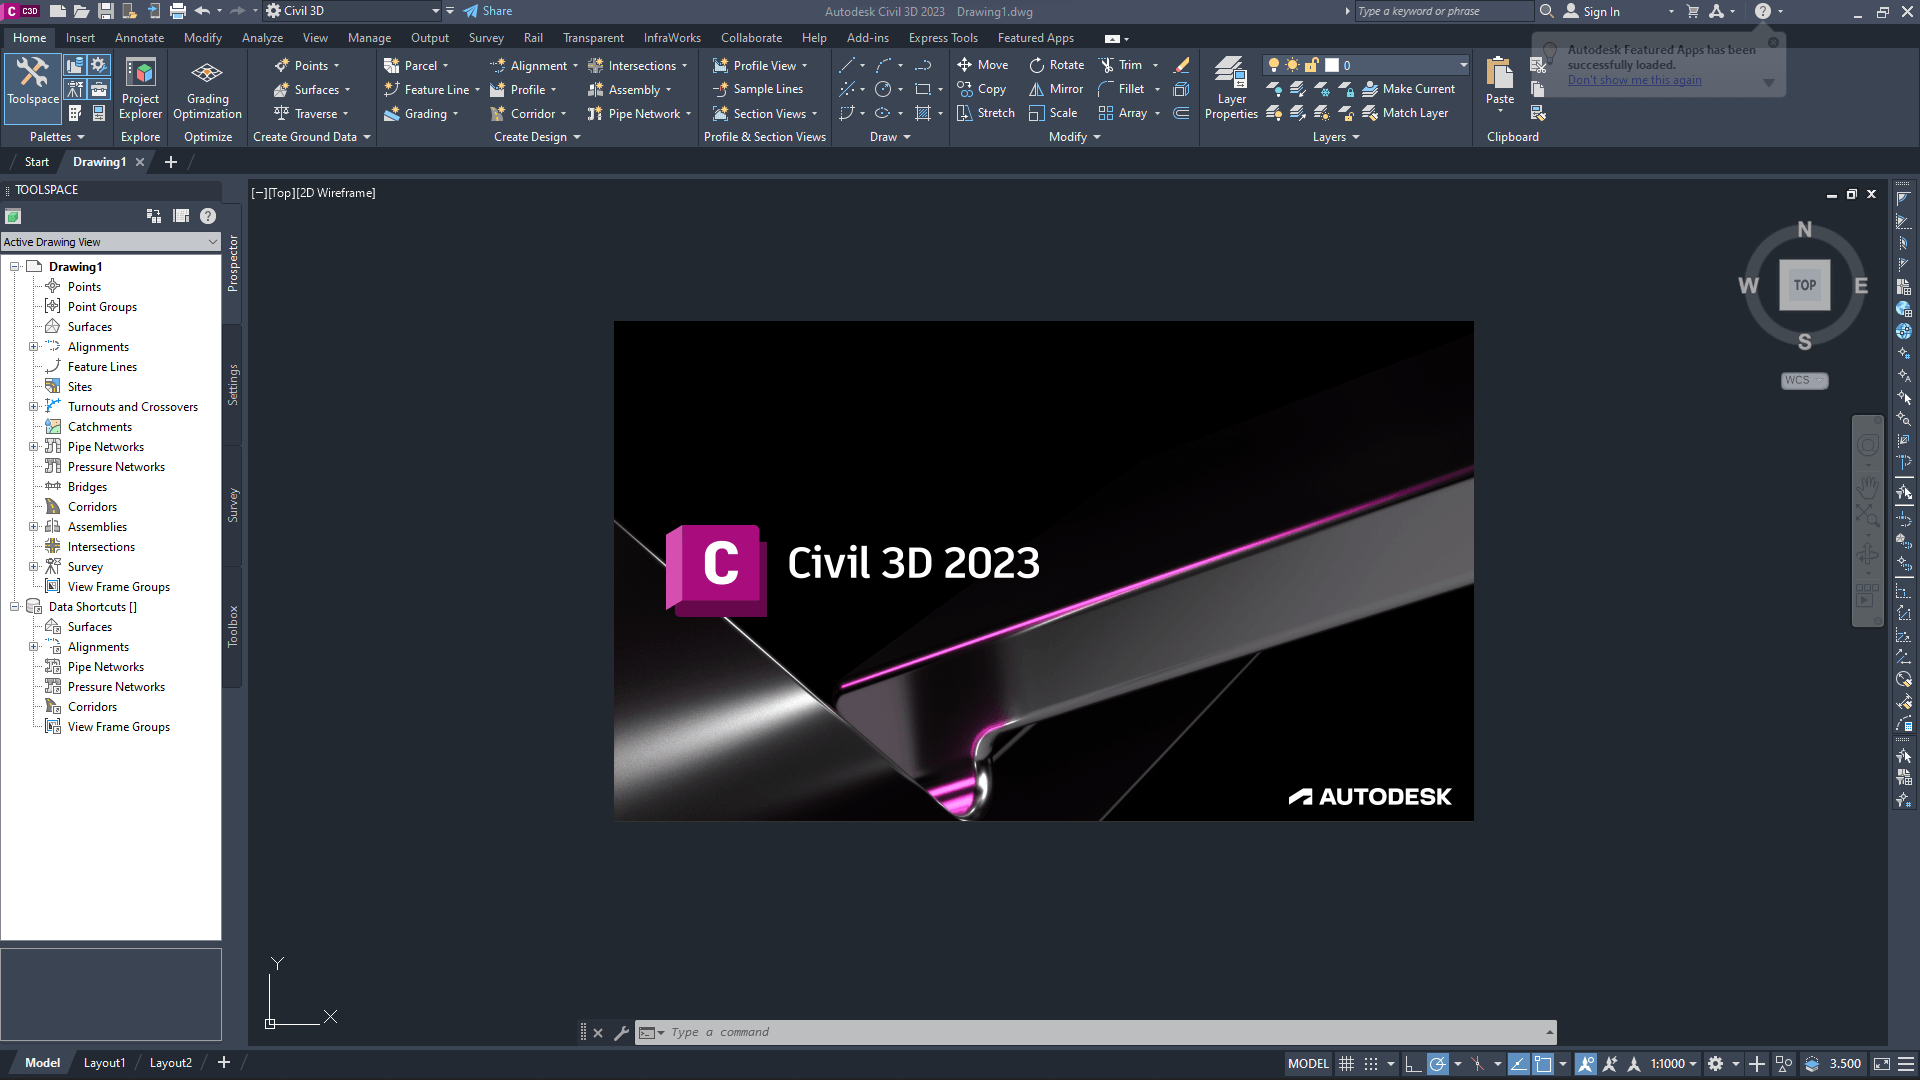 Working with Autodesk Civil 3D 2023.1 full